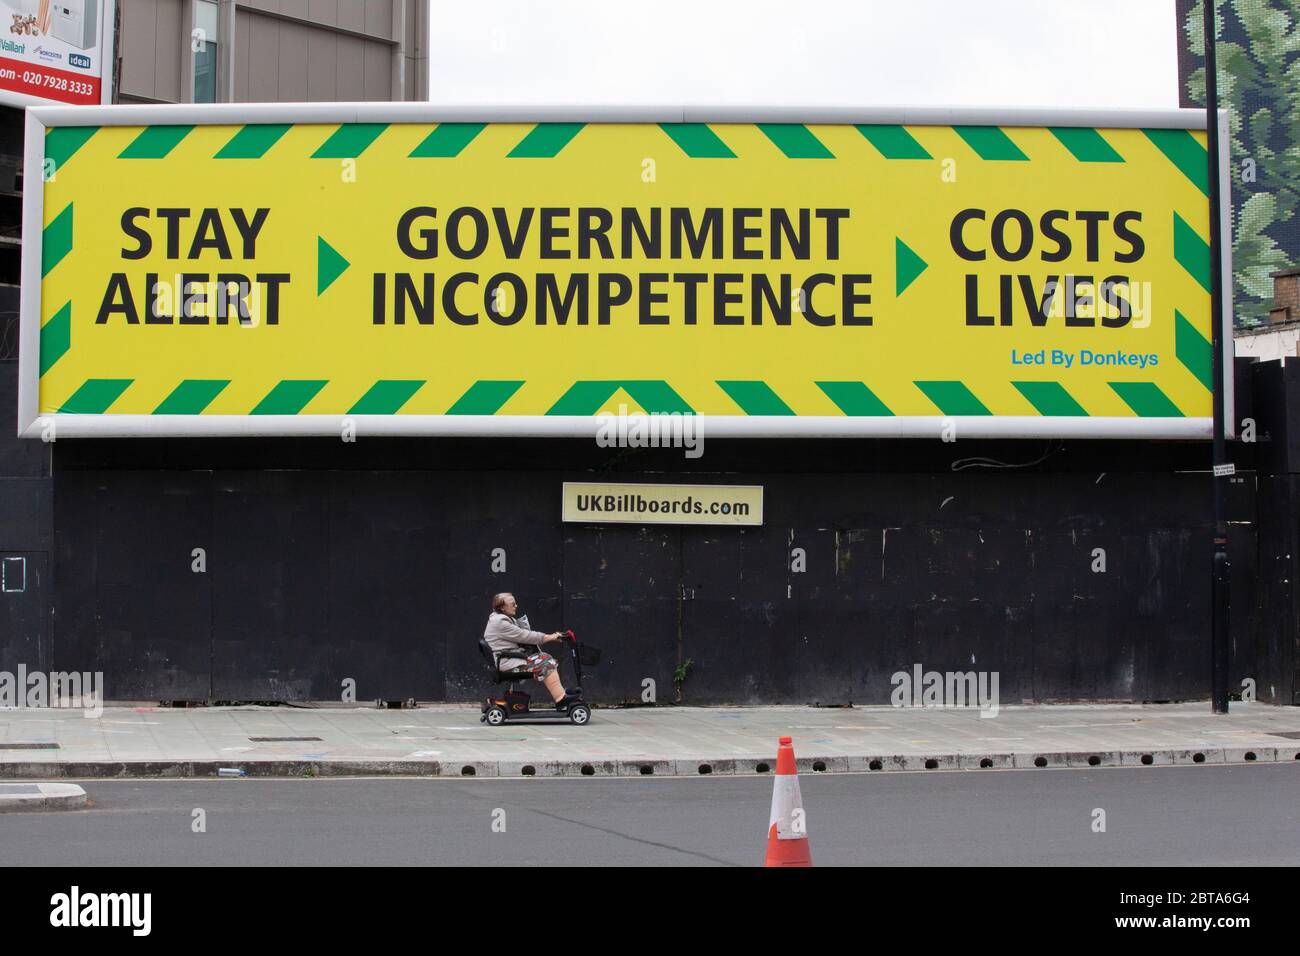 London, UK: 24 May 2020: Campaign group Led By Donkeys erected a pair of billboards spoofing the Government's Stay Alert slogan by adding 'Government Incompetence Costs Lives'. A second poster shows a graph of numbers of deaths in different countries, with the UK having the second highest number of deaths globally, after the USA. Anna Watson/Alamy Llive News Stock Photo